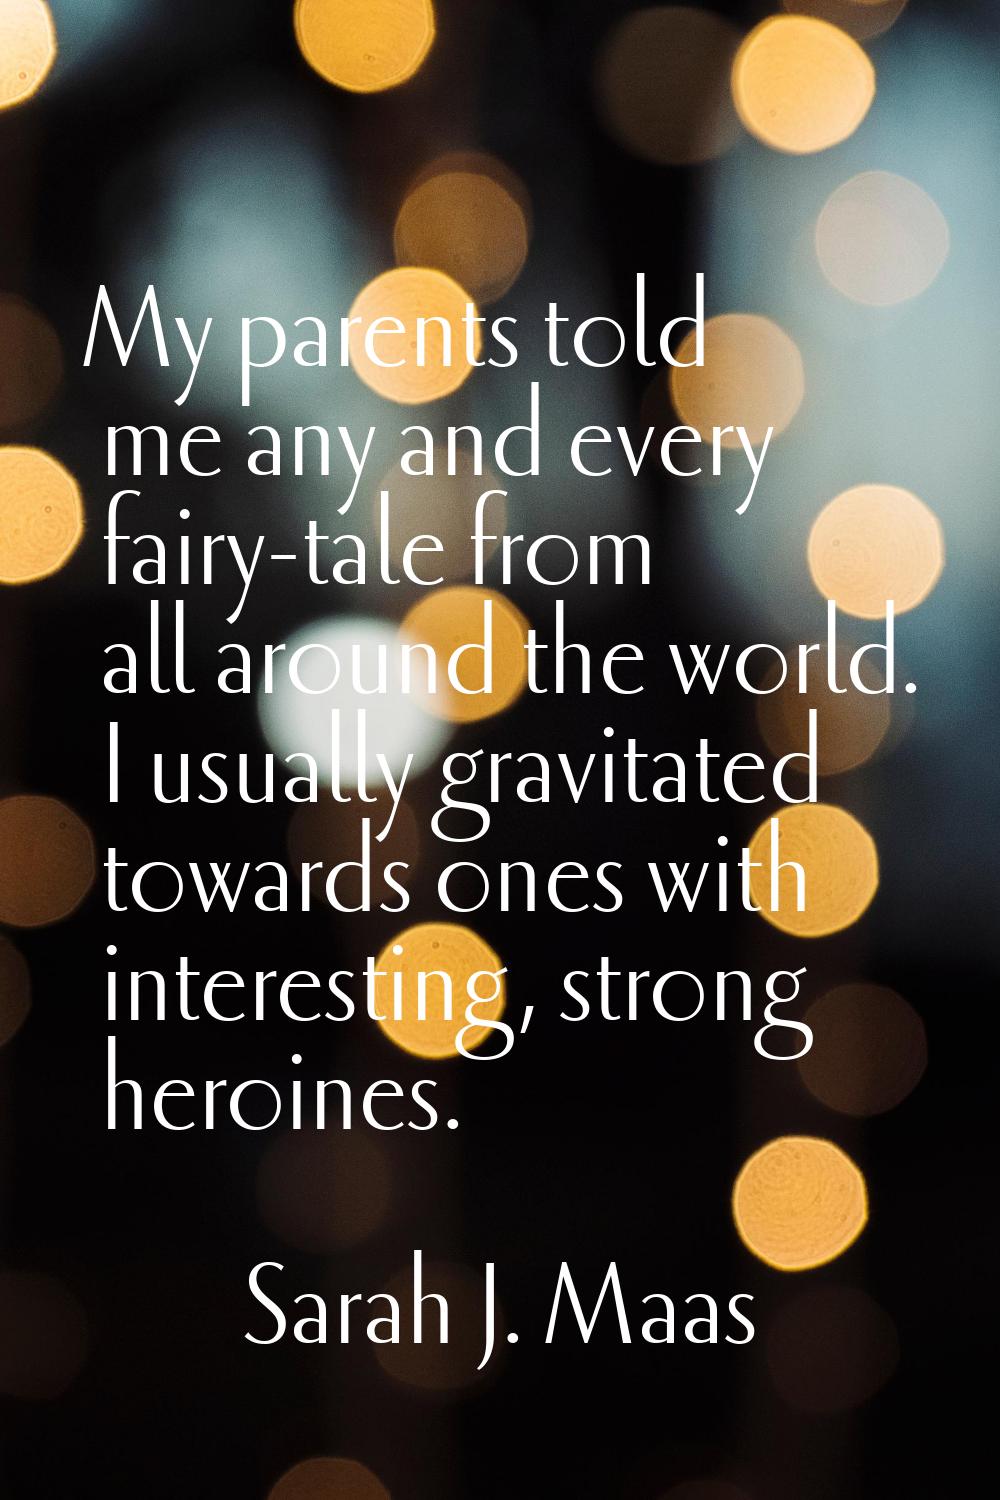 My parents told me any and every fairy-tale from all around the world. I usually gravitated towards